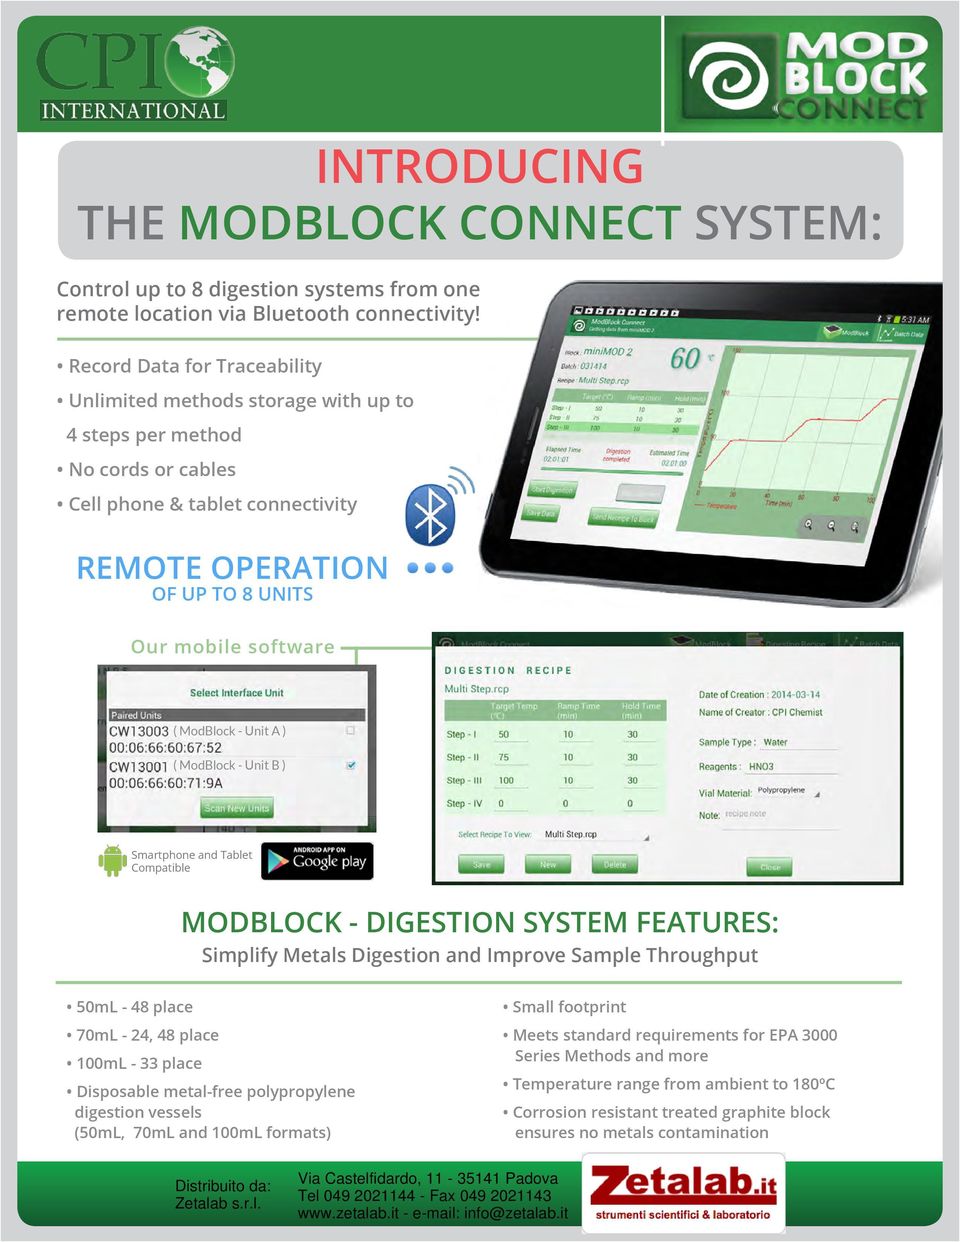 ModBlock - Unit A ) ( ModBlock - Unit B ) Smartphone and Tablet Compatible MODBLOCK - DIGESTION SYSTEM FEATURES: Simplify Metals Digestion and Improve Sample Throughput 50mL - 48 place 70mL - 24, 48